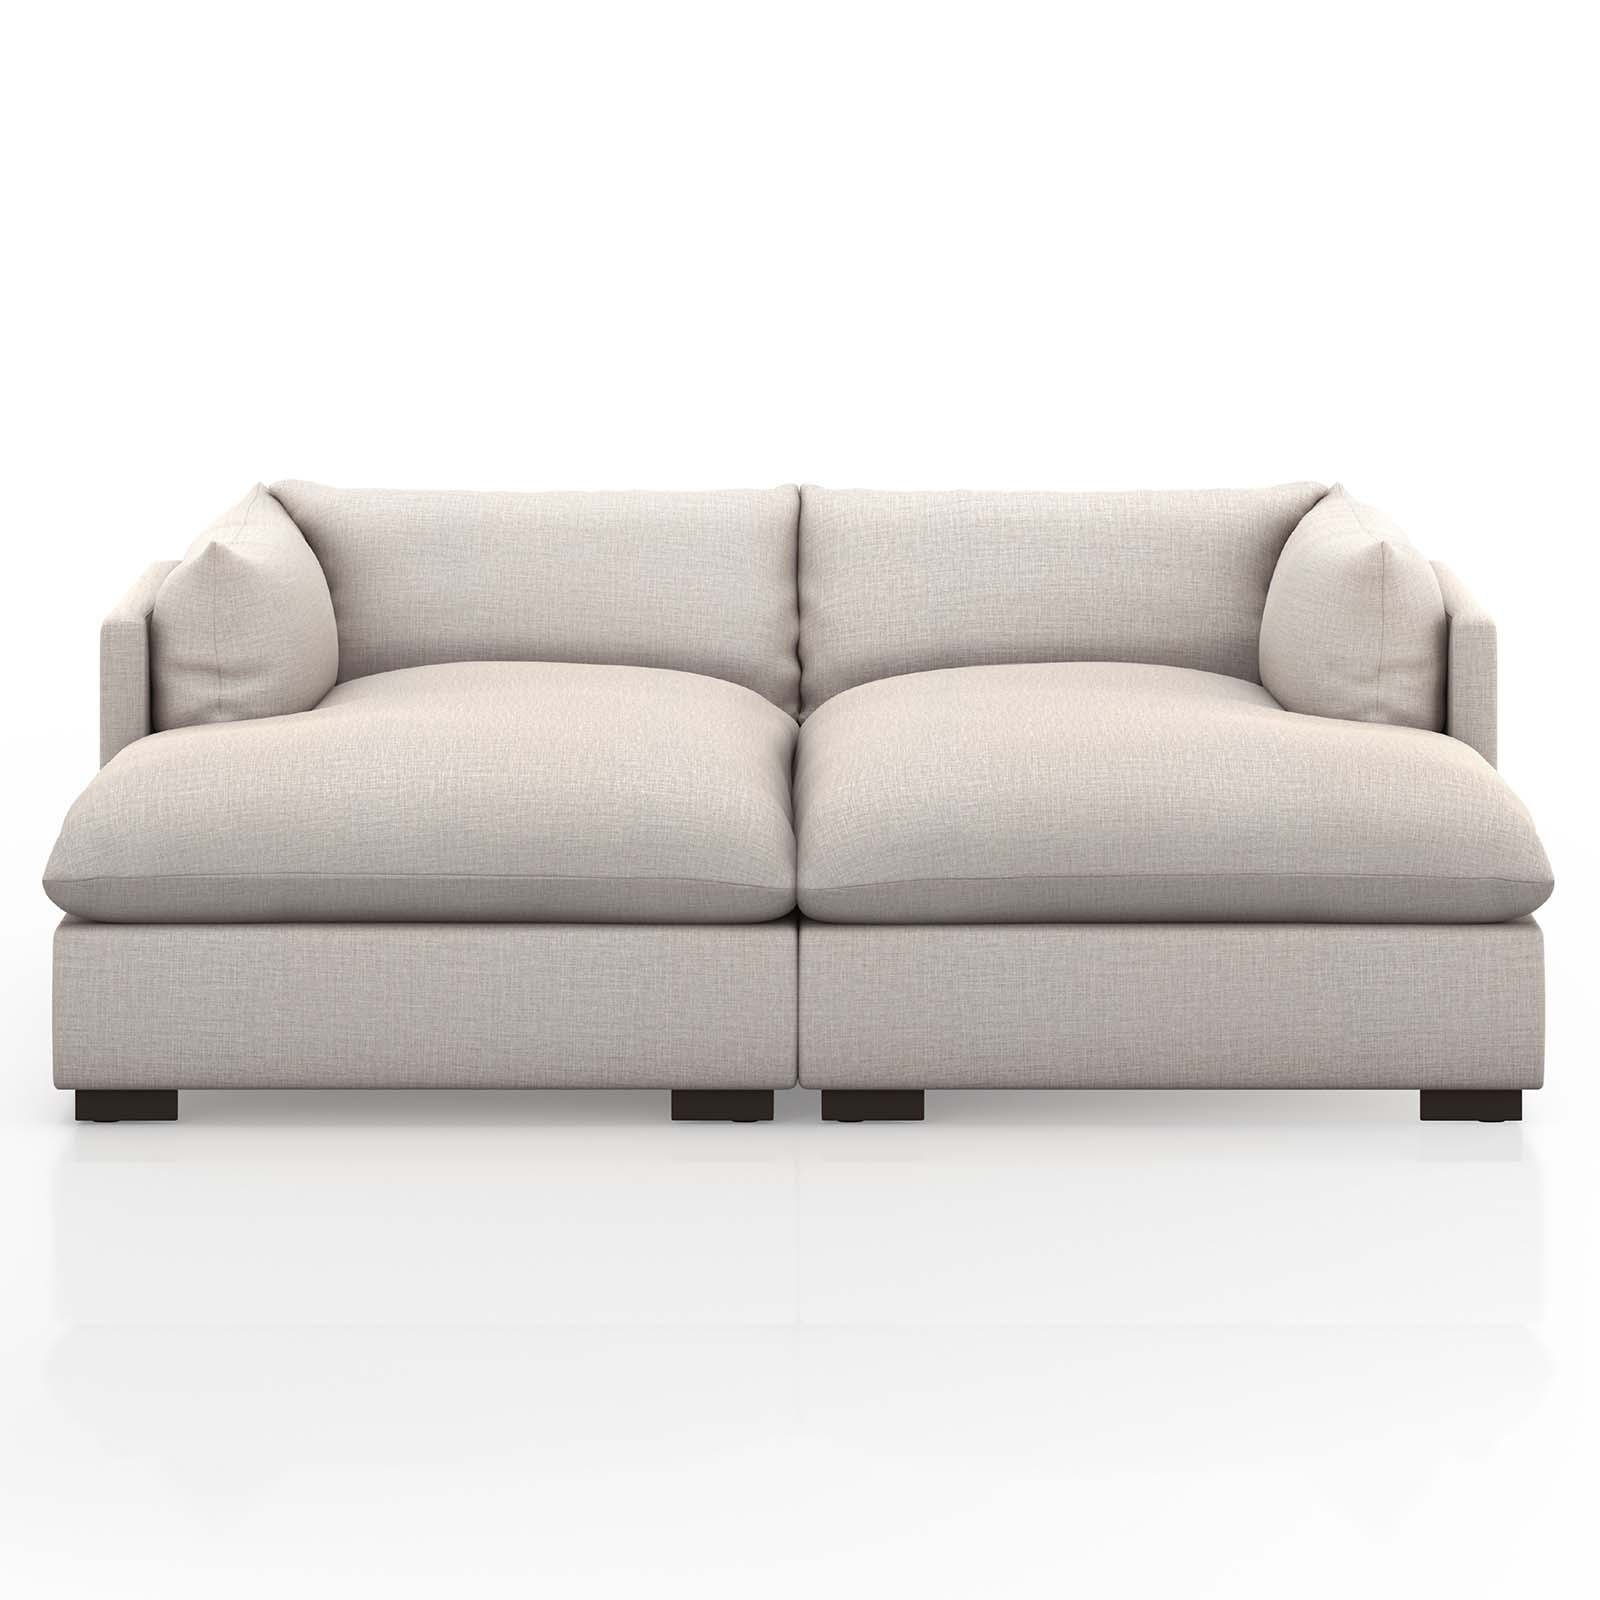 Courtney Double Chaise Sectional